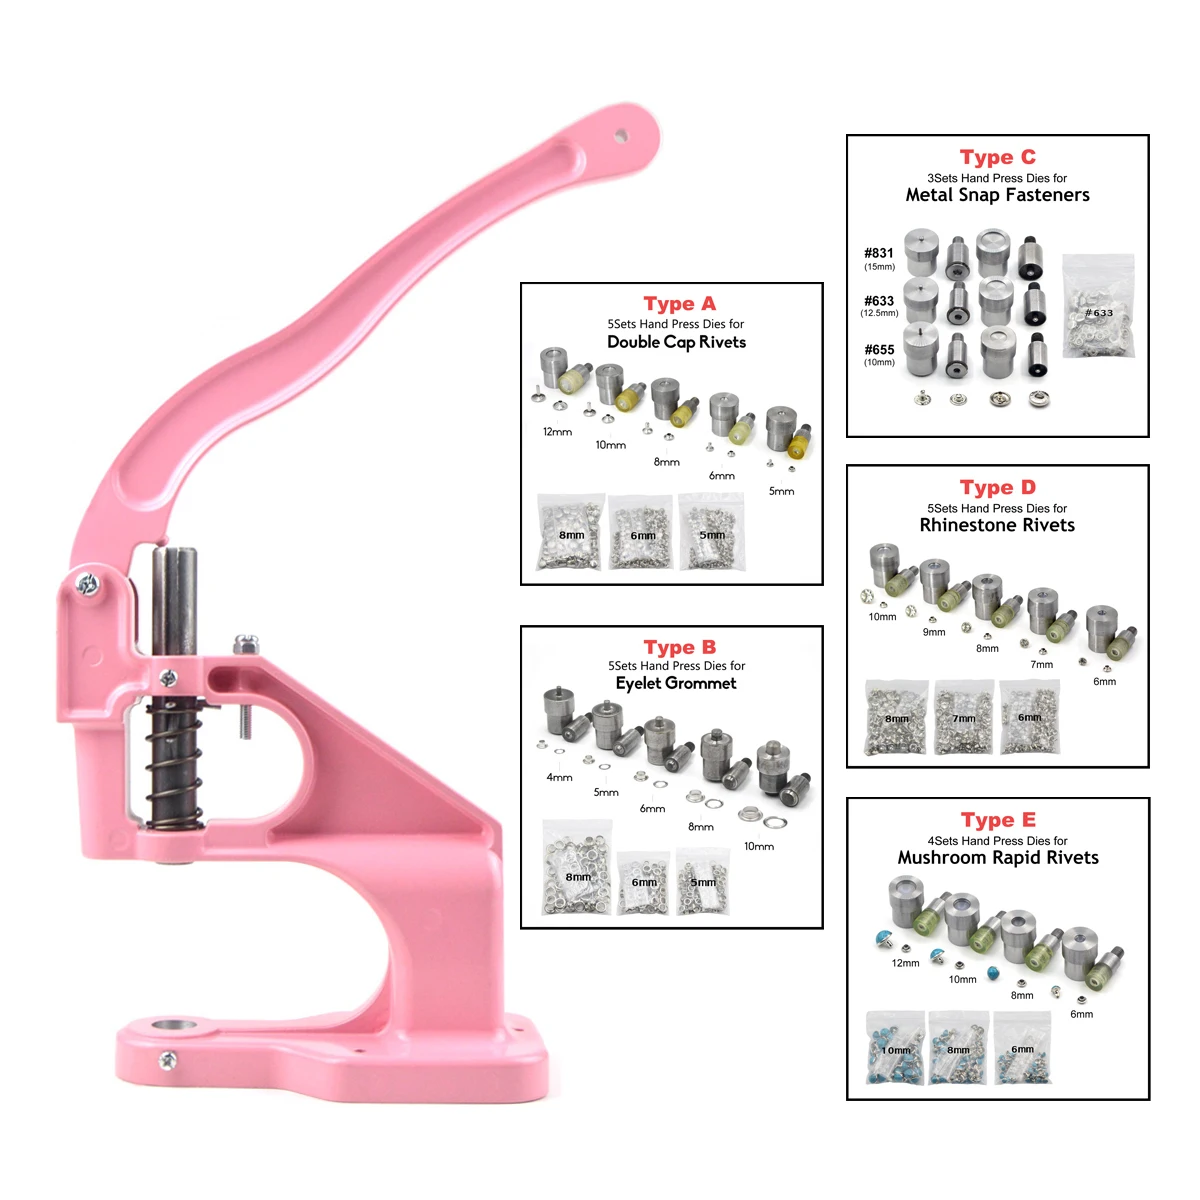 

KALASO Pink Accurate Hand Press Machine For Eyelet Grommet Or Double Cap Rivets Snap Buttons Dies Mould Tool Craft Diy Supplies